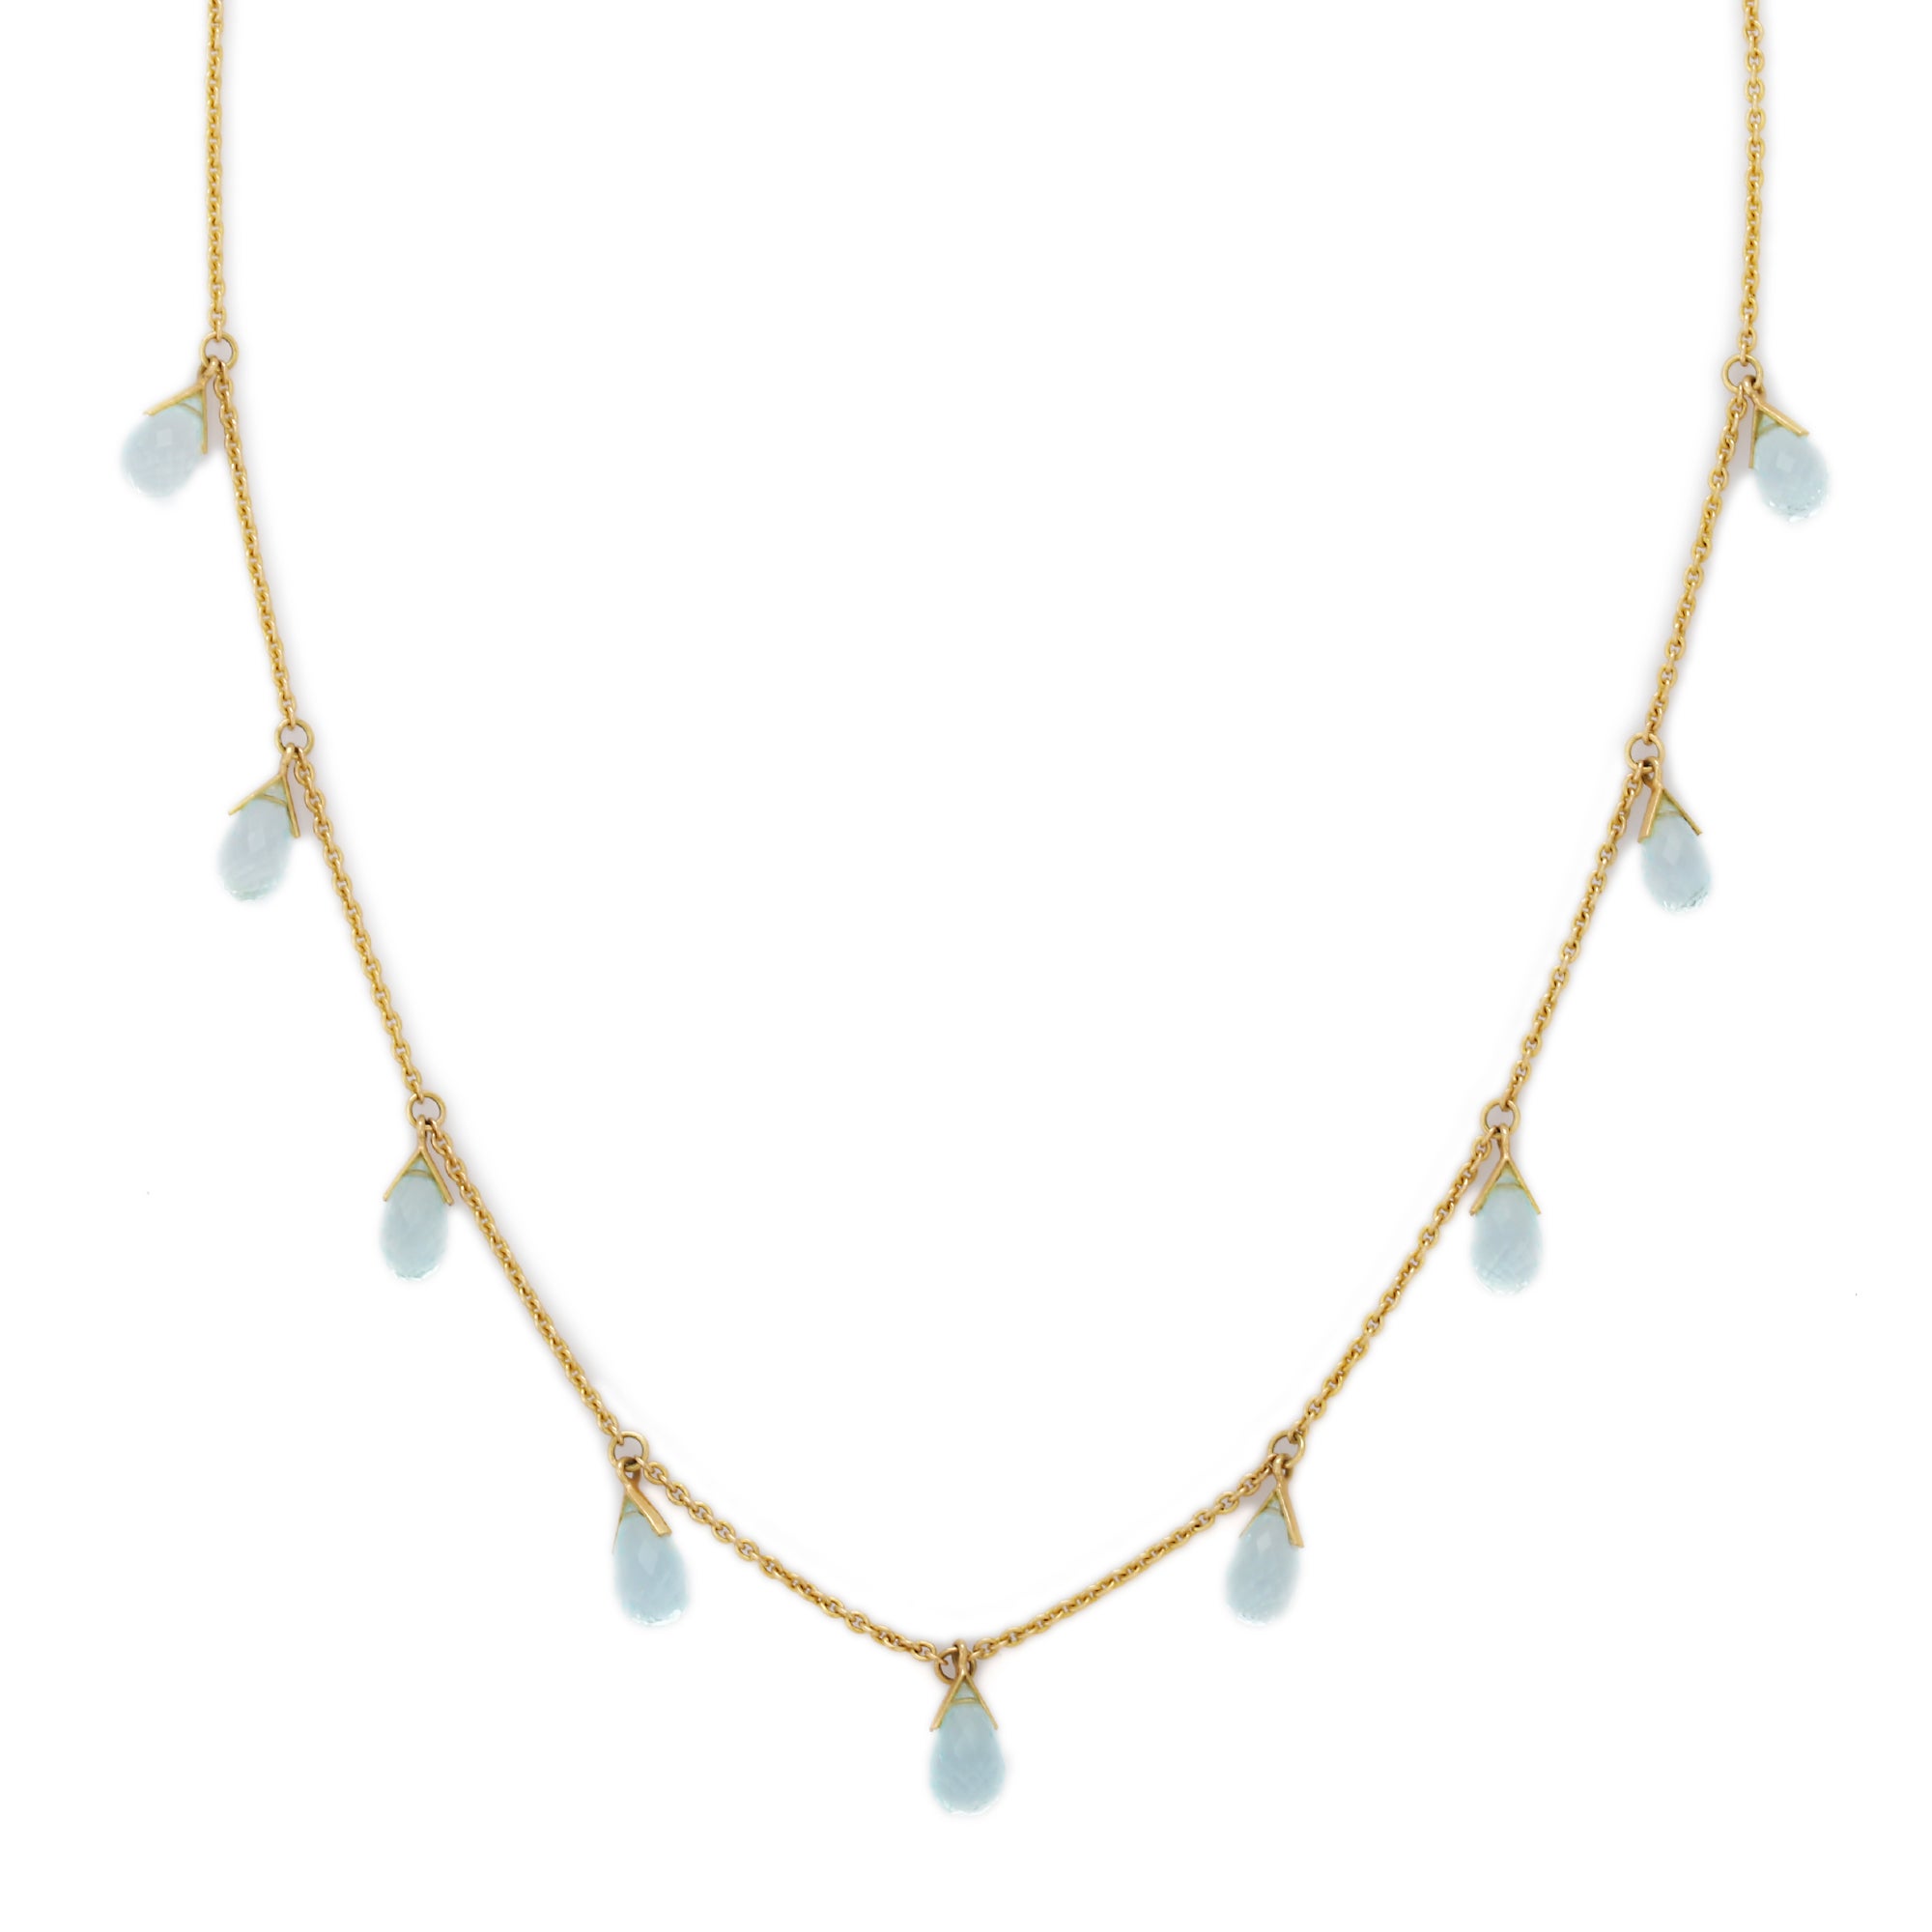 Blue Topaz Necklace in 18K Gold studded with drop cut topaz.
Accessorize your look with this elegant blue topaz charm necklace. This stunning piece of jewelry instantly elevates a casual look or dressy outfit. Comfortable and easy to wear, it is